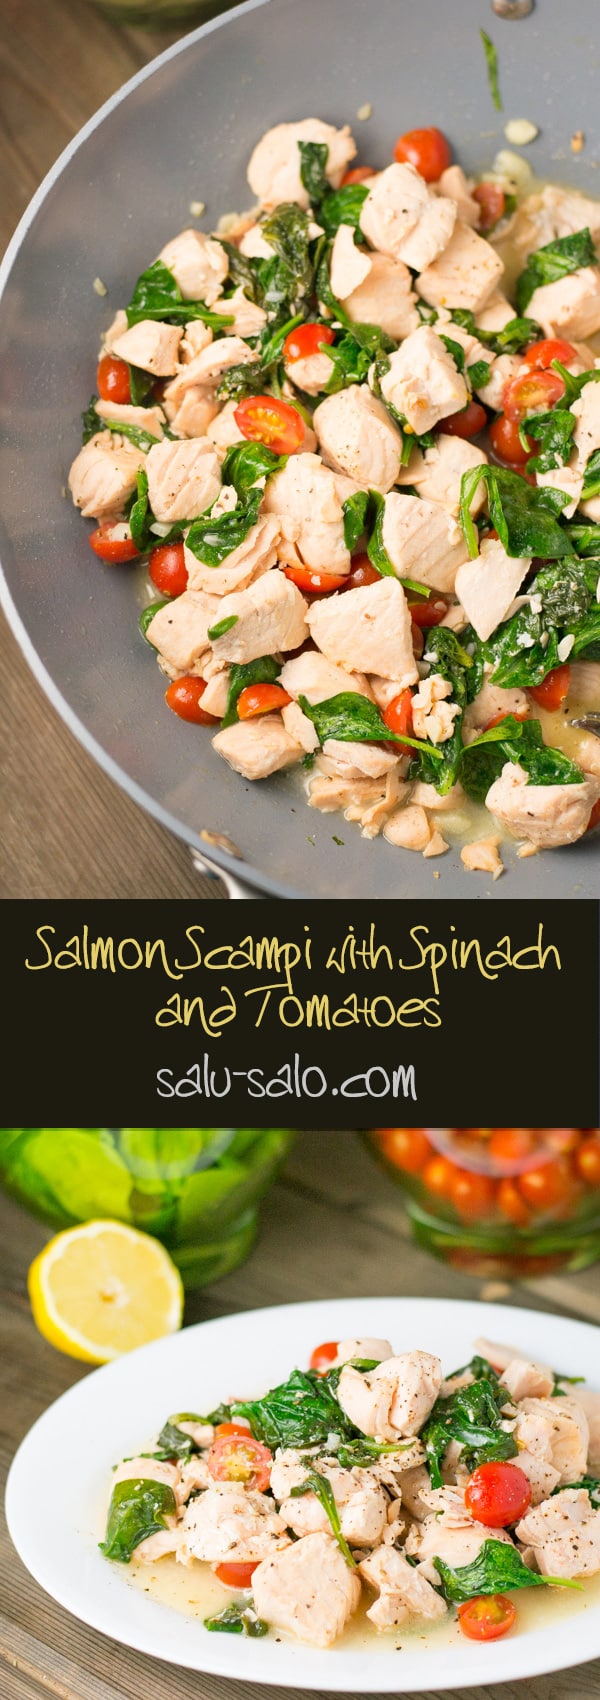 Salmon Scampi with Spinach and Tomatoes